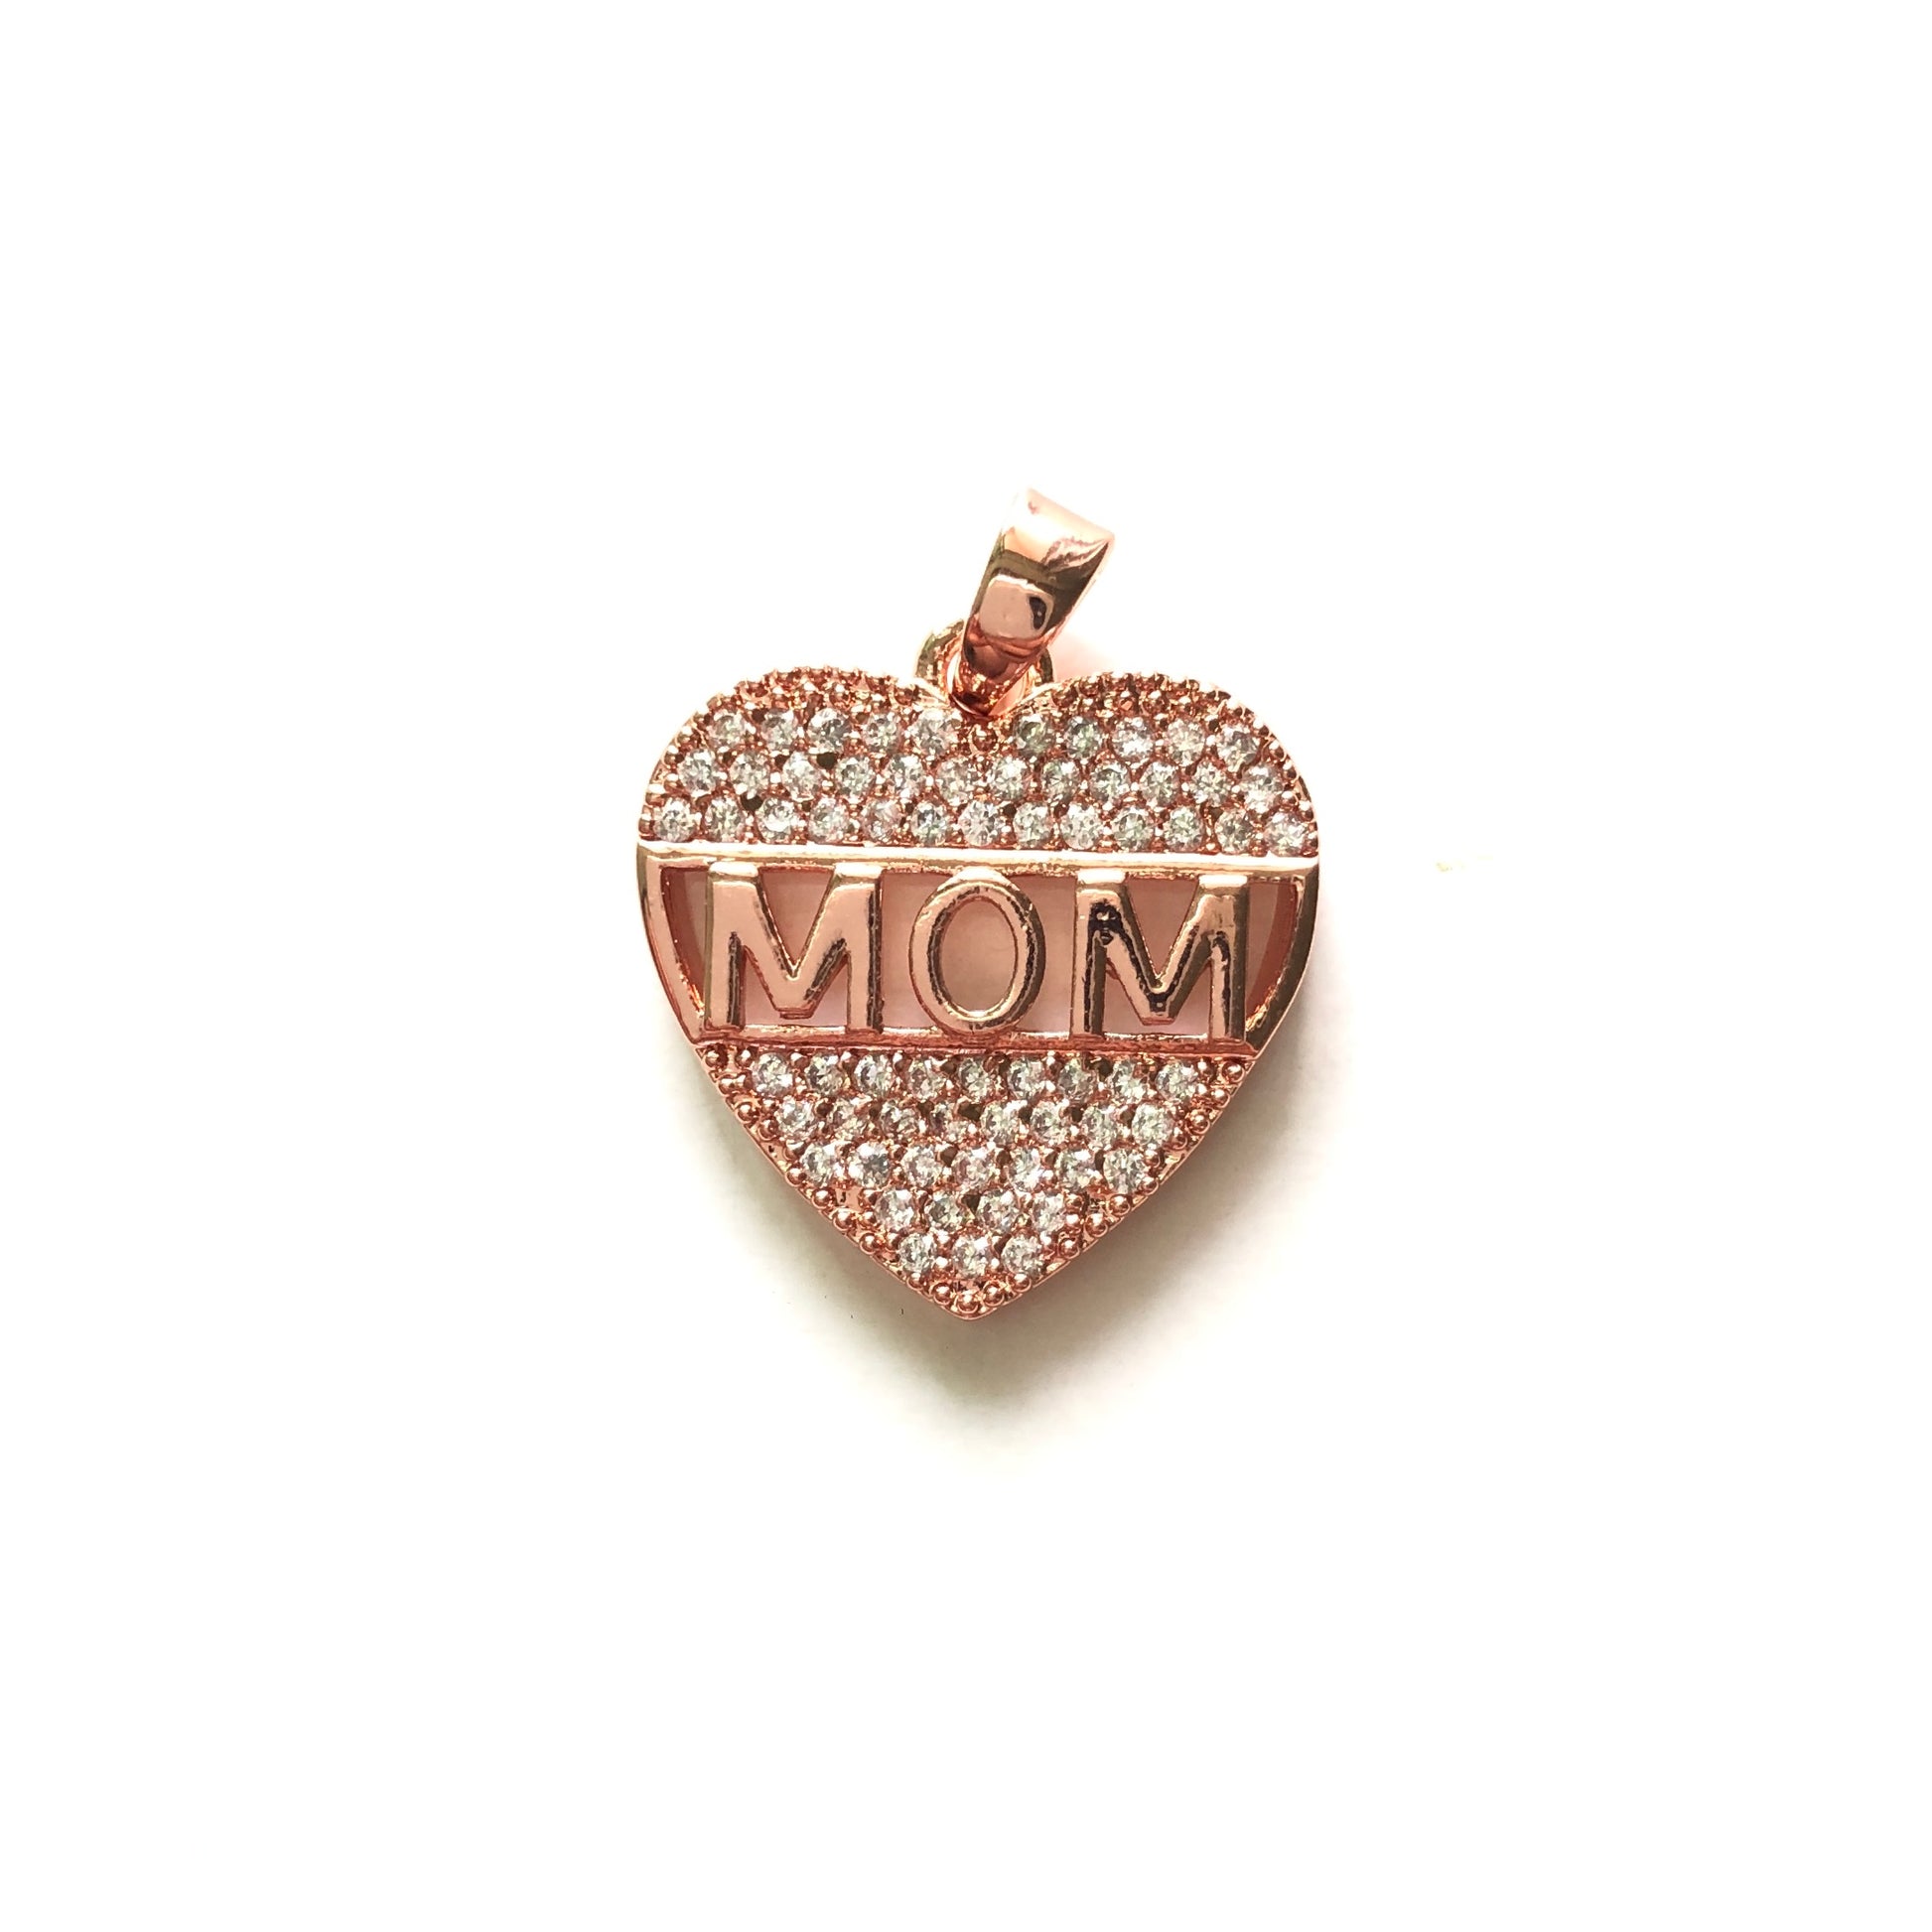 10pcs/lot 18*17mm CZ Paved Mom Charms for Mother's Day Rose Gold CZ Paved Charms Hearts Mother's Day Charms Beads Beyond